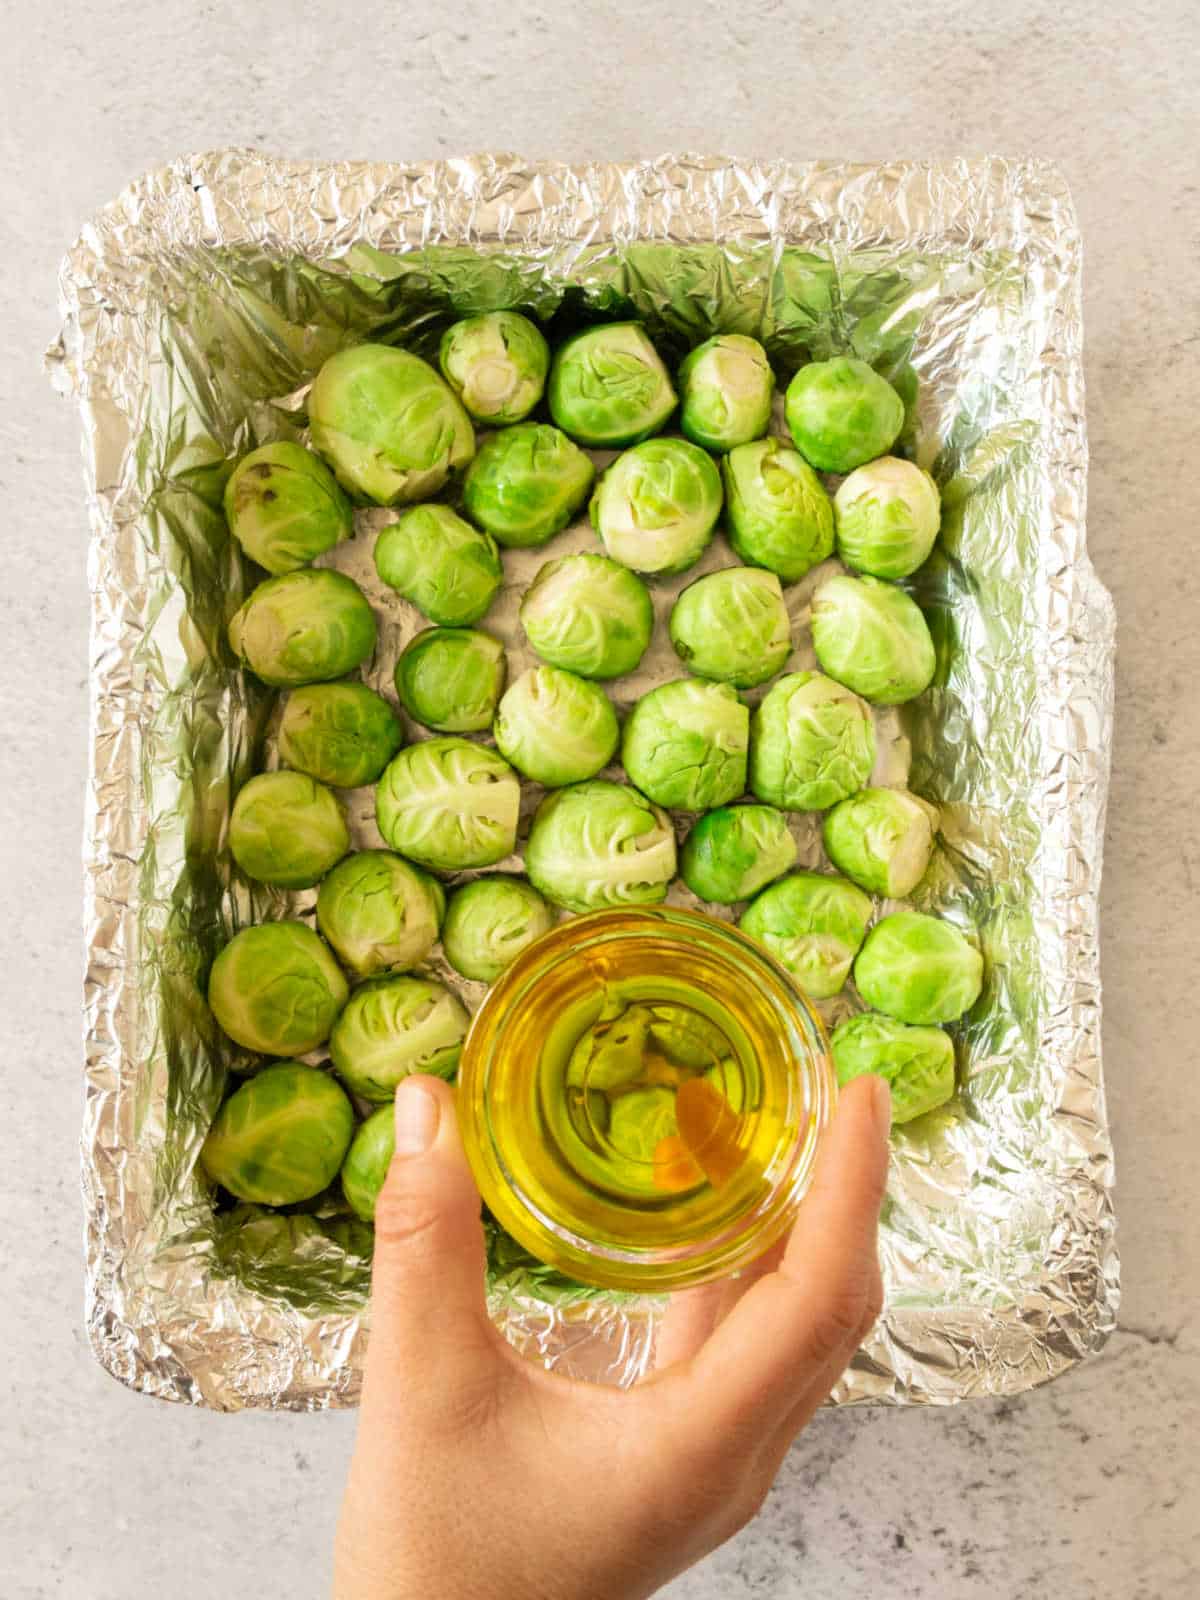 Hand with oil bowl above Brussels sprouts on a foil lined dish. Light grey surface.